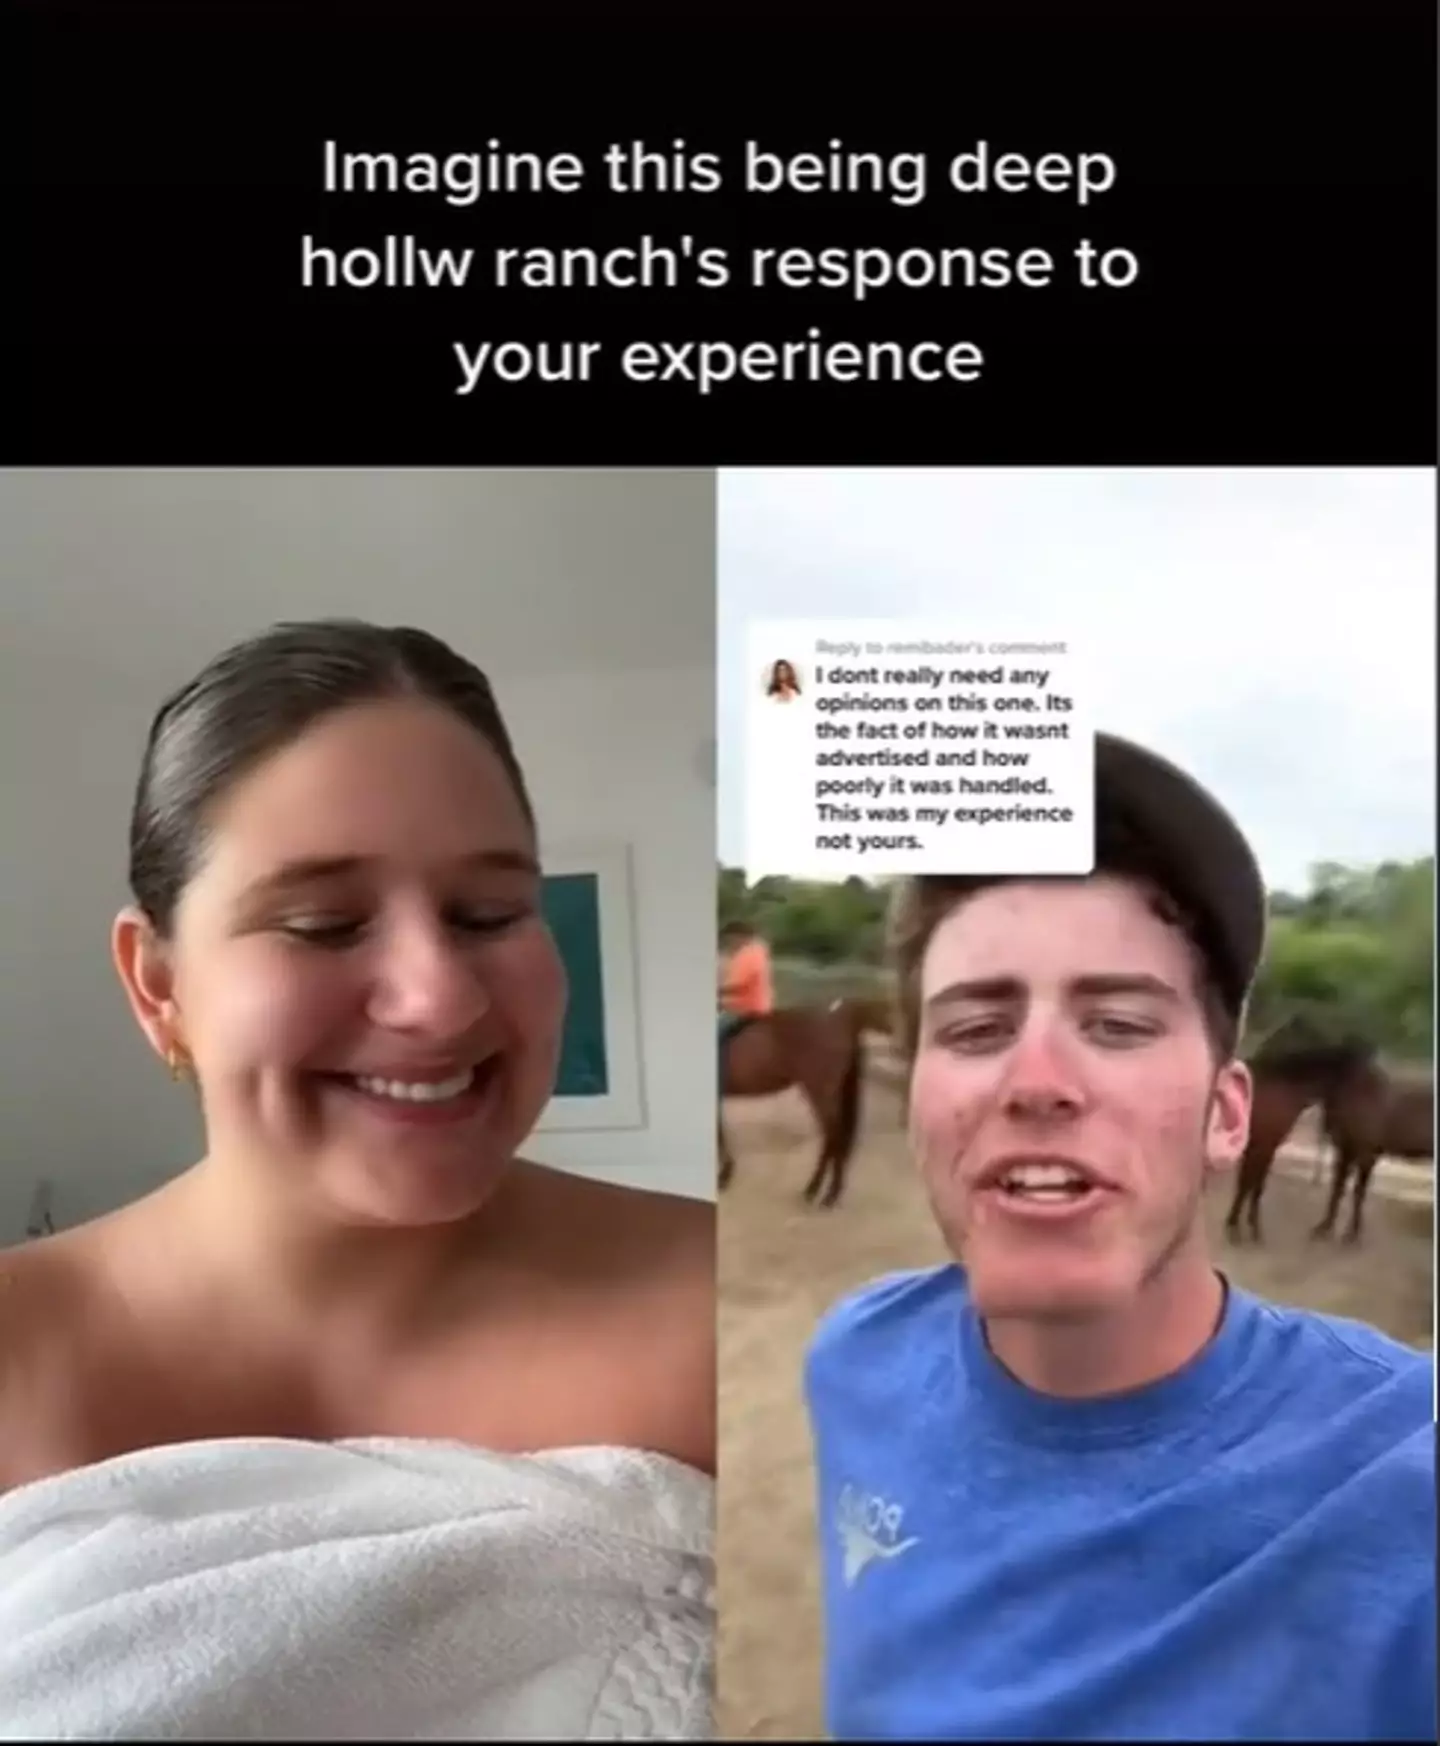 The influencer was later abused on social media by a ranch employee who called her a 'fat b***h'.